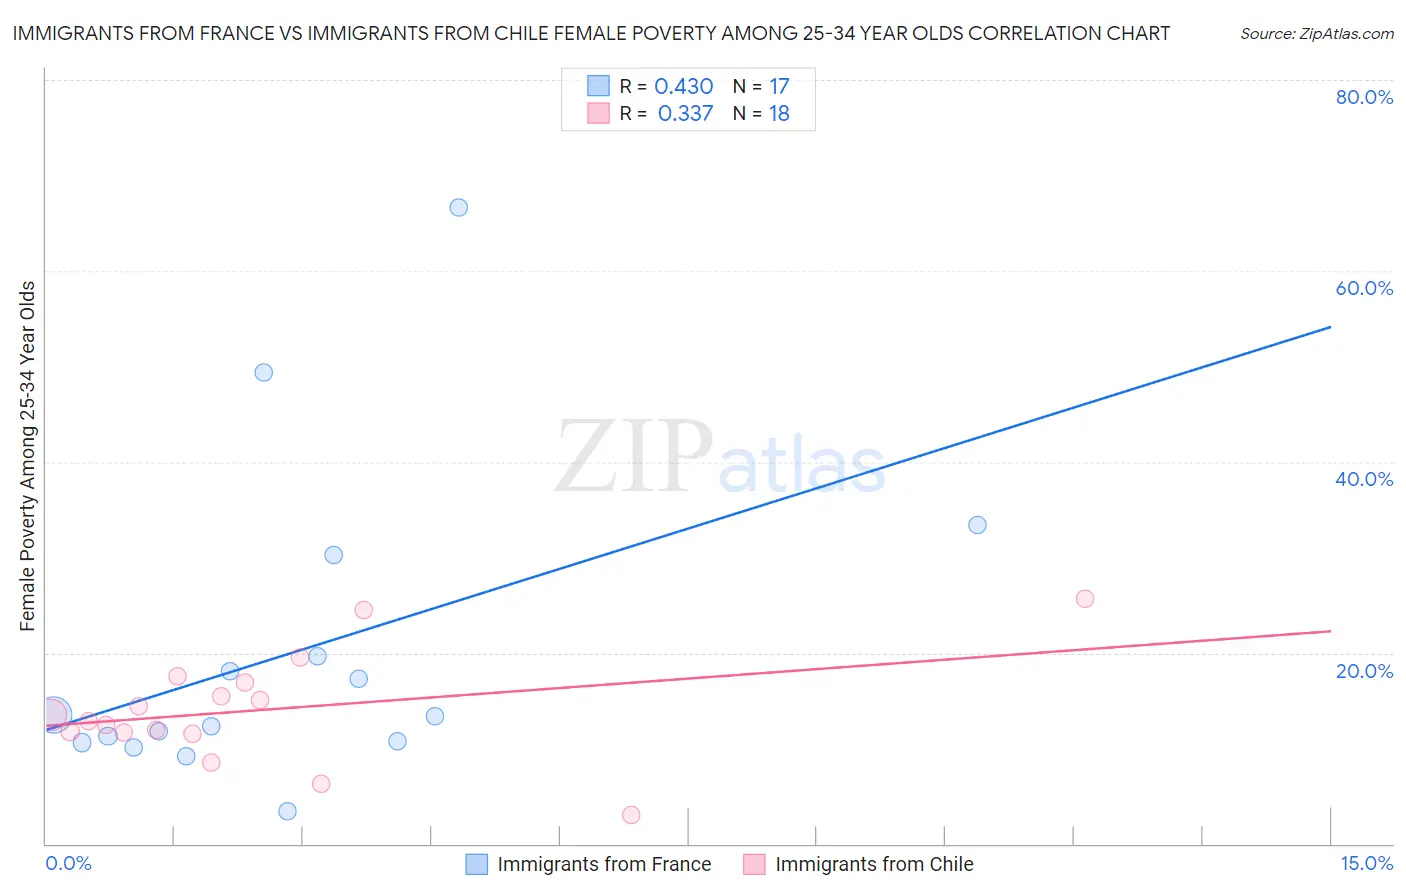 Immigrants from France vs Immigrants from Chile Female Poverty Among 25-34 Year Olds